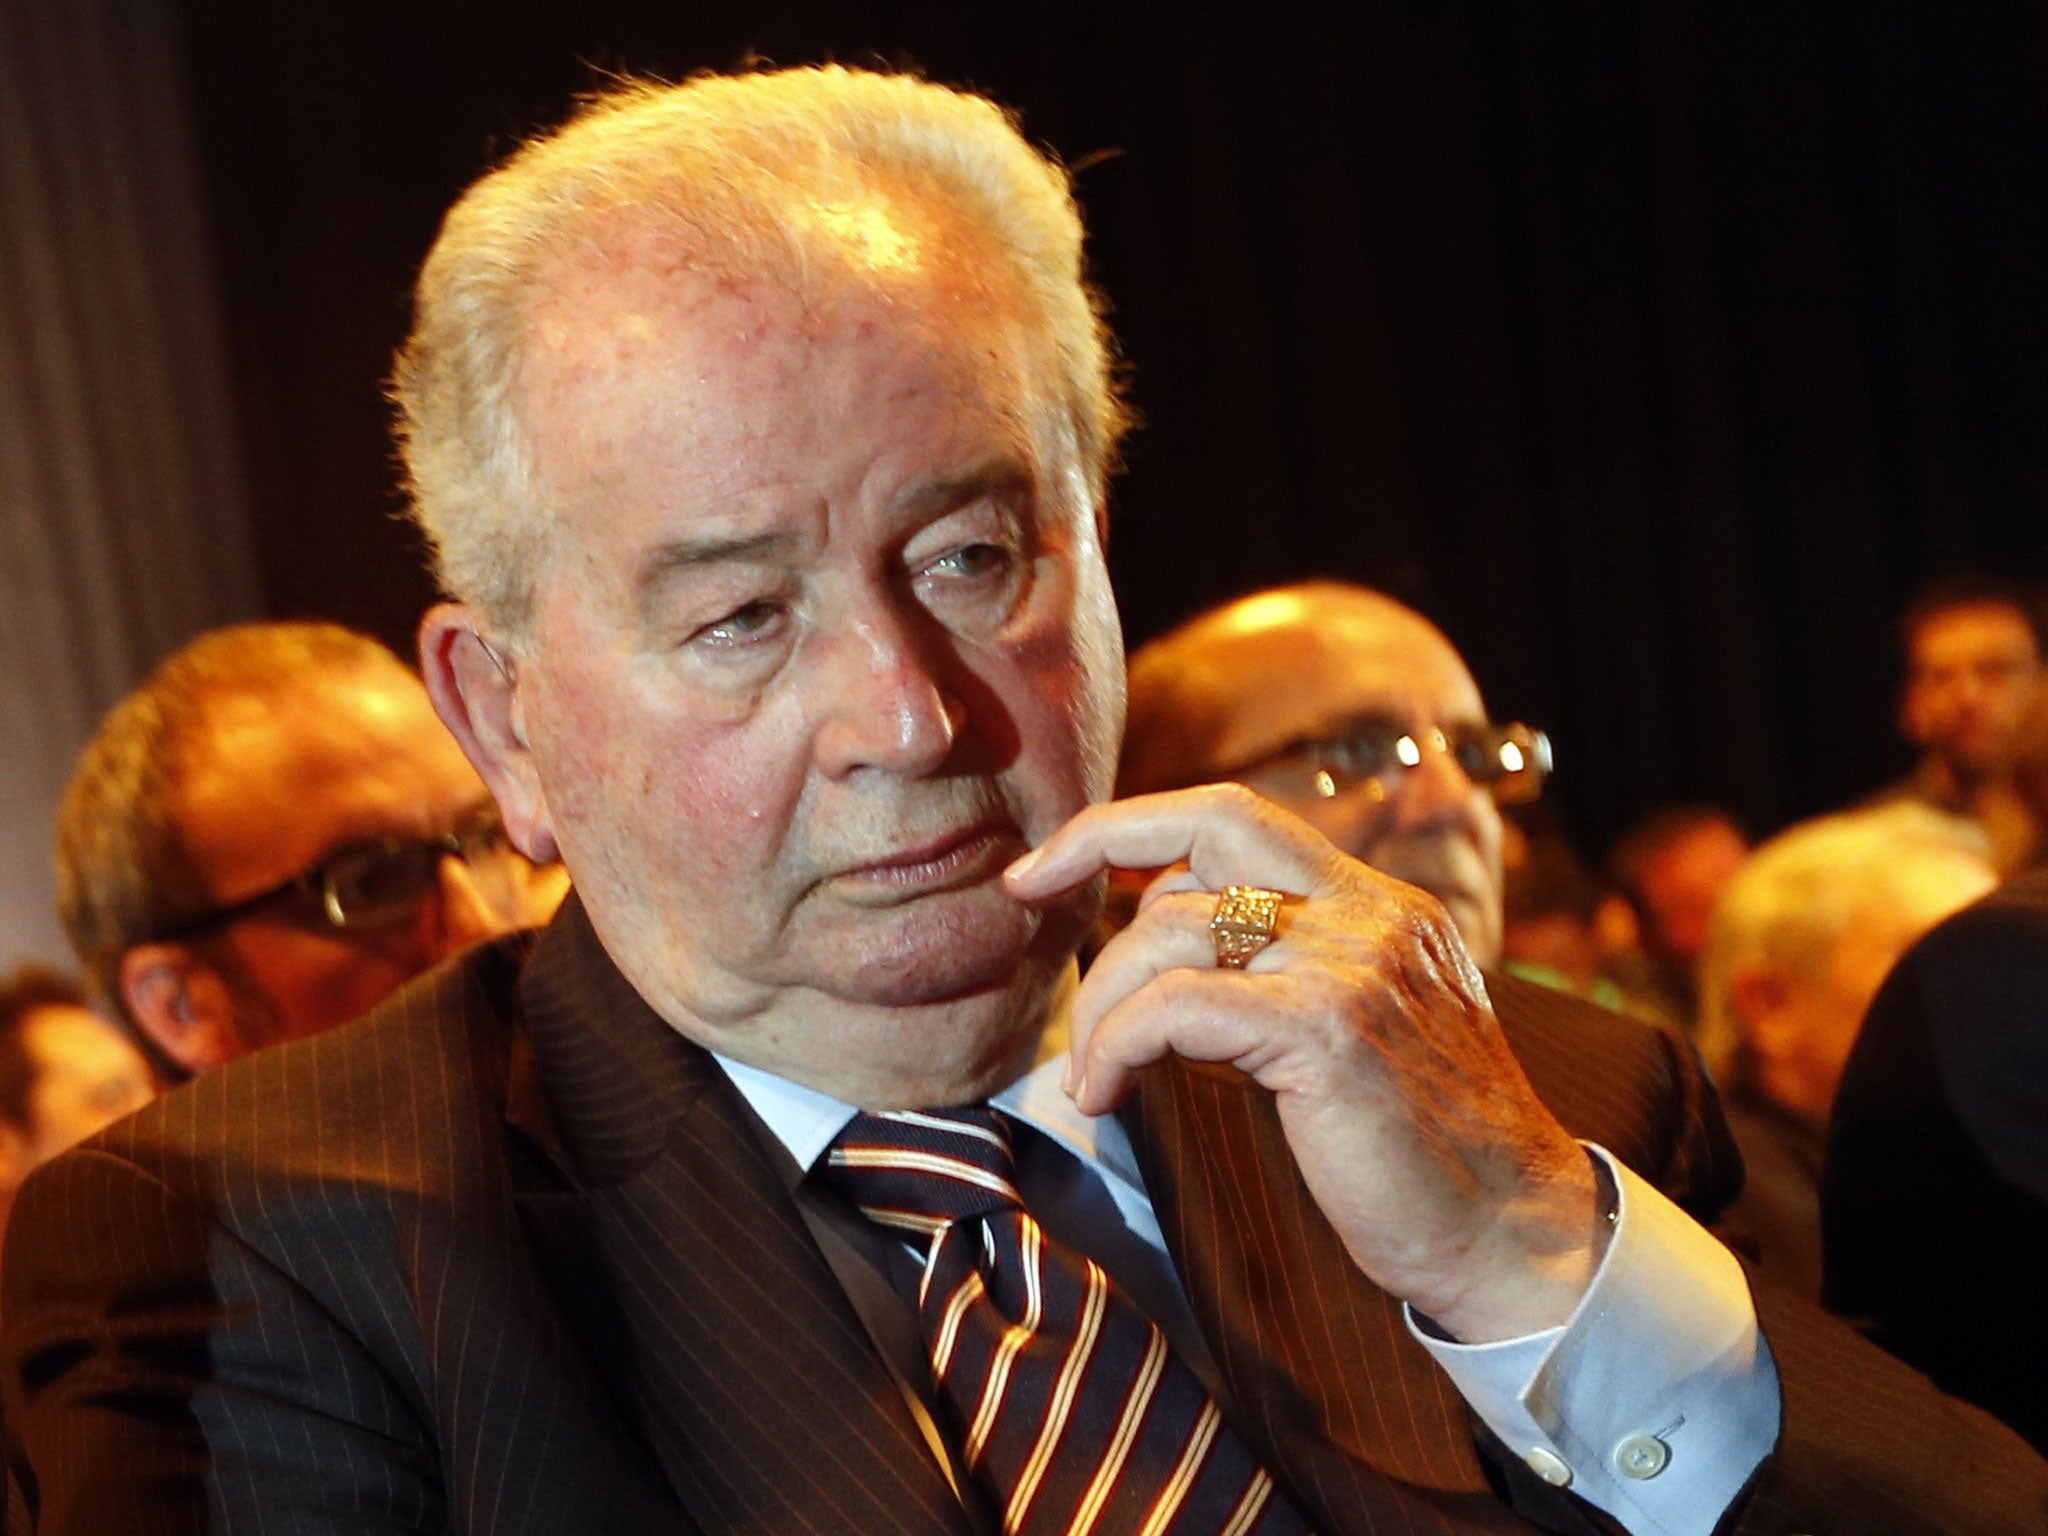 Julio Grondona: he said he would give England his World Cup vote in return for getting the Falklands back